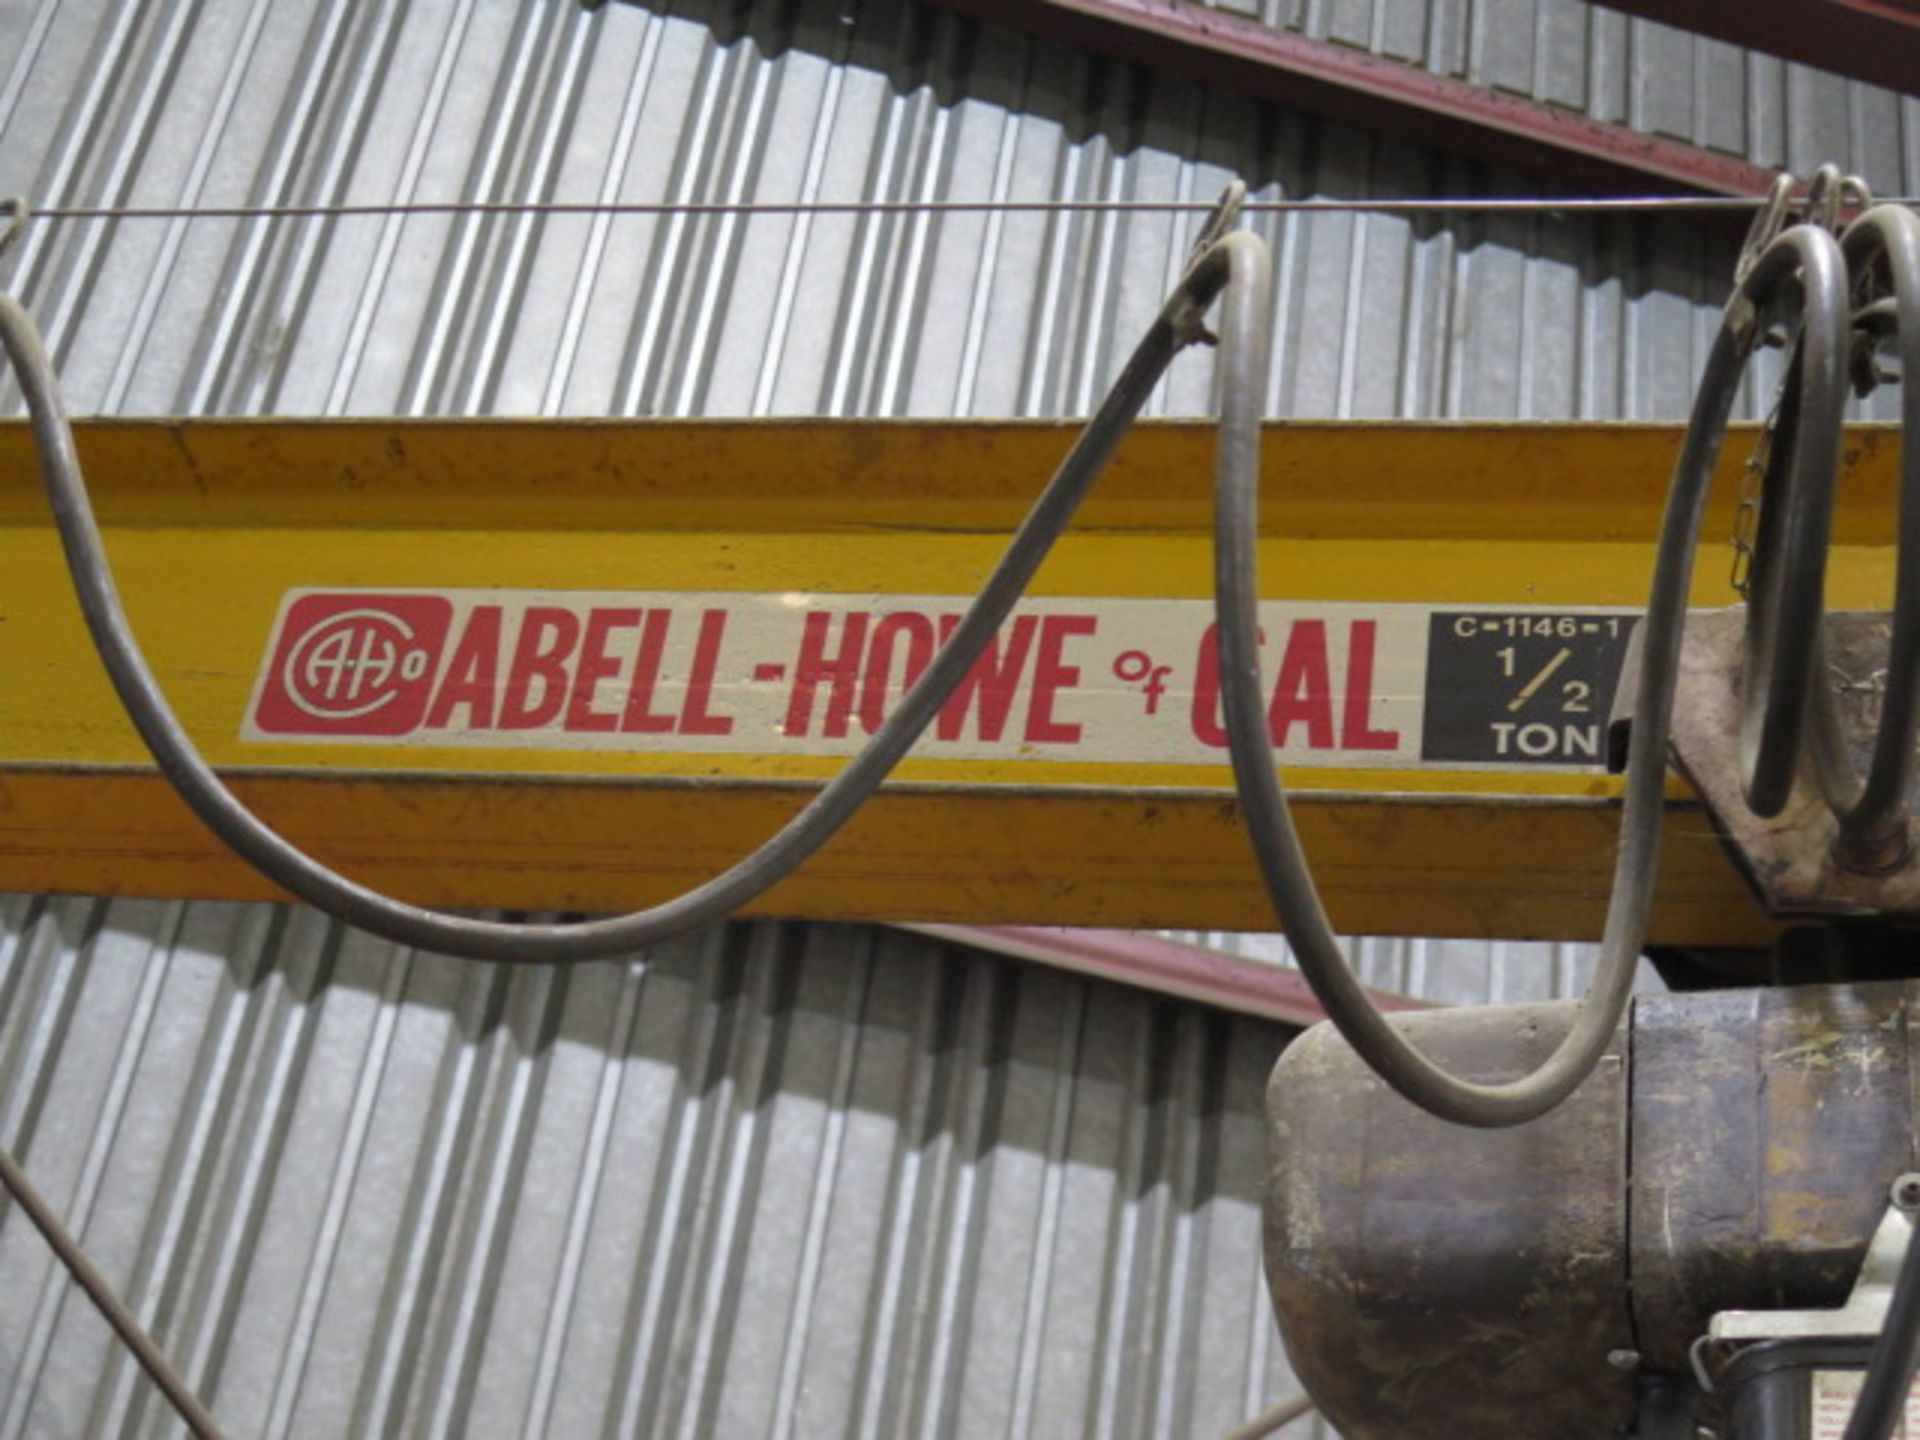 Abell-Howe 1/2 Ton Floor Mounted Jib Crane w/ Electric Hoist (SOLD AS-IS - NO WARRANTY) - Image 7 of 7